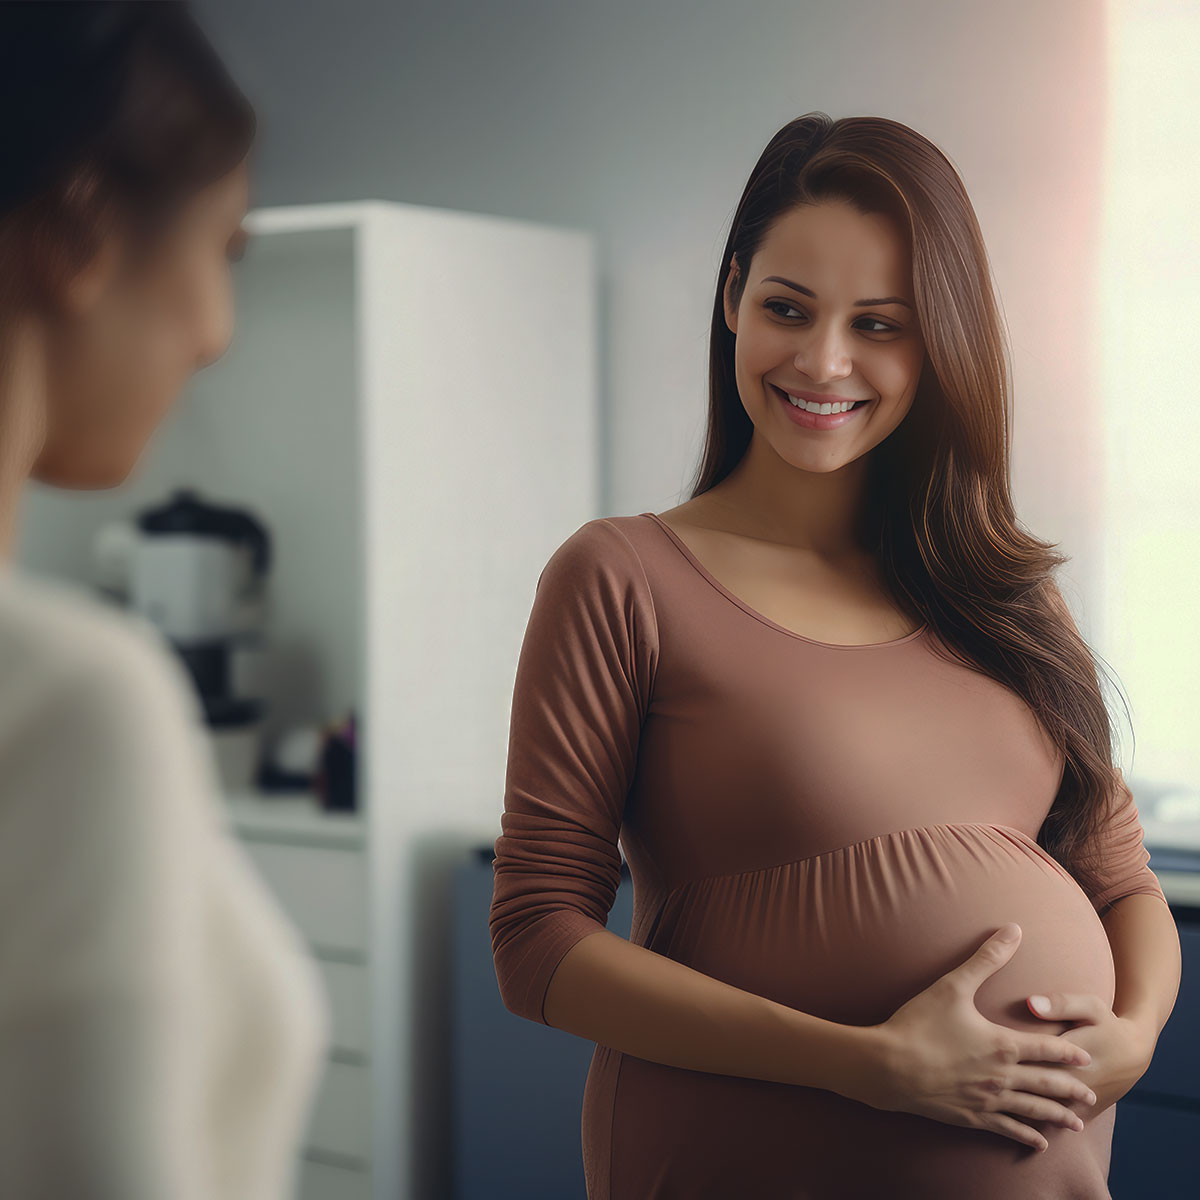 Make an appointment with Dr. Tiffany Becker for a prenatal consultation in Palos Verdes